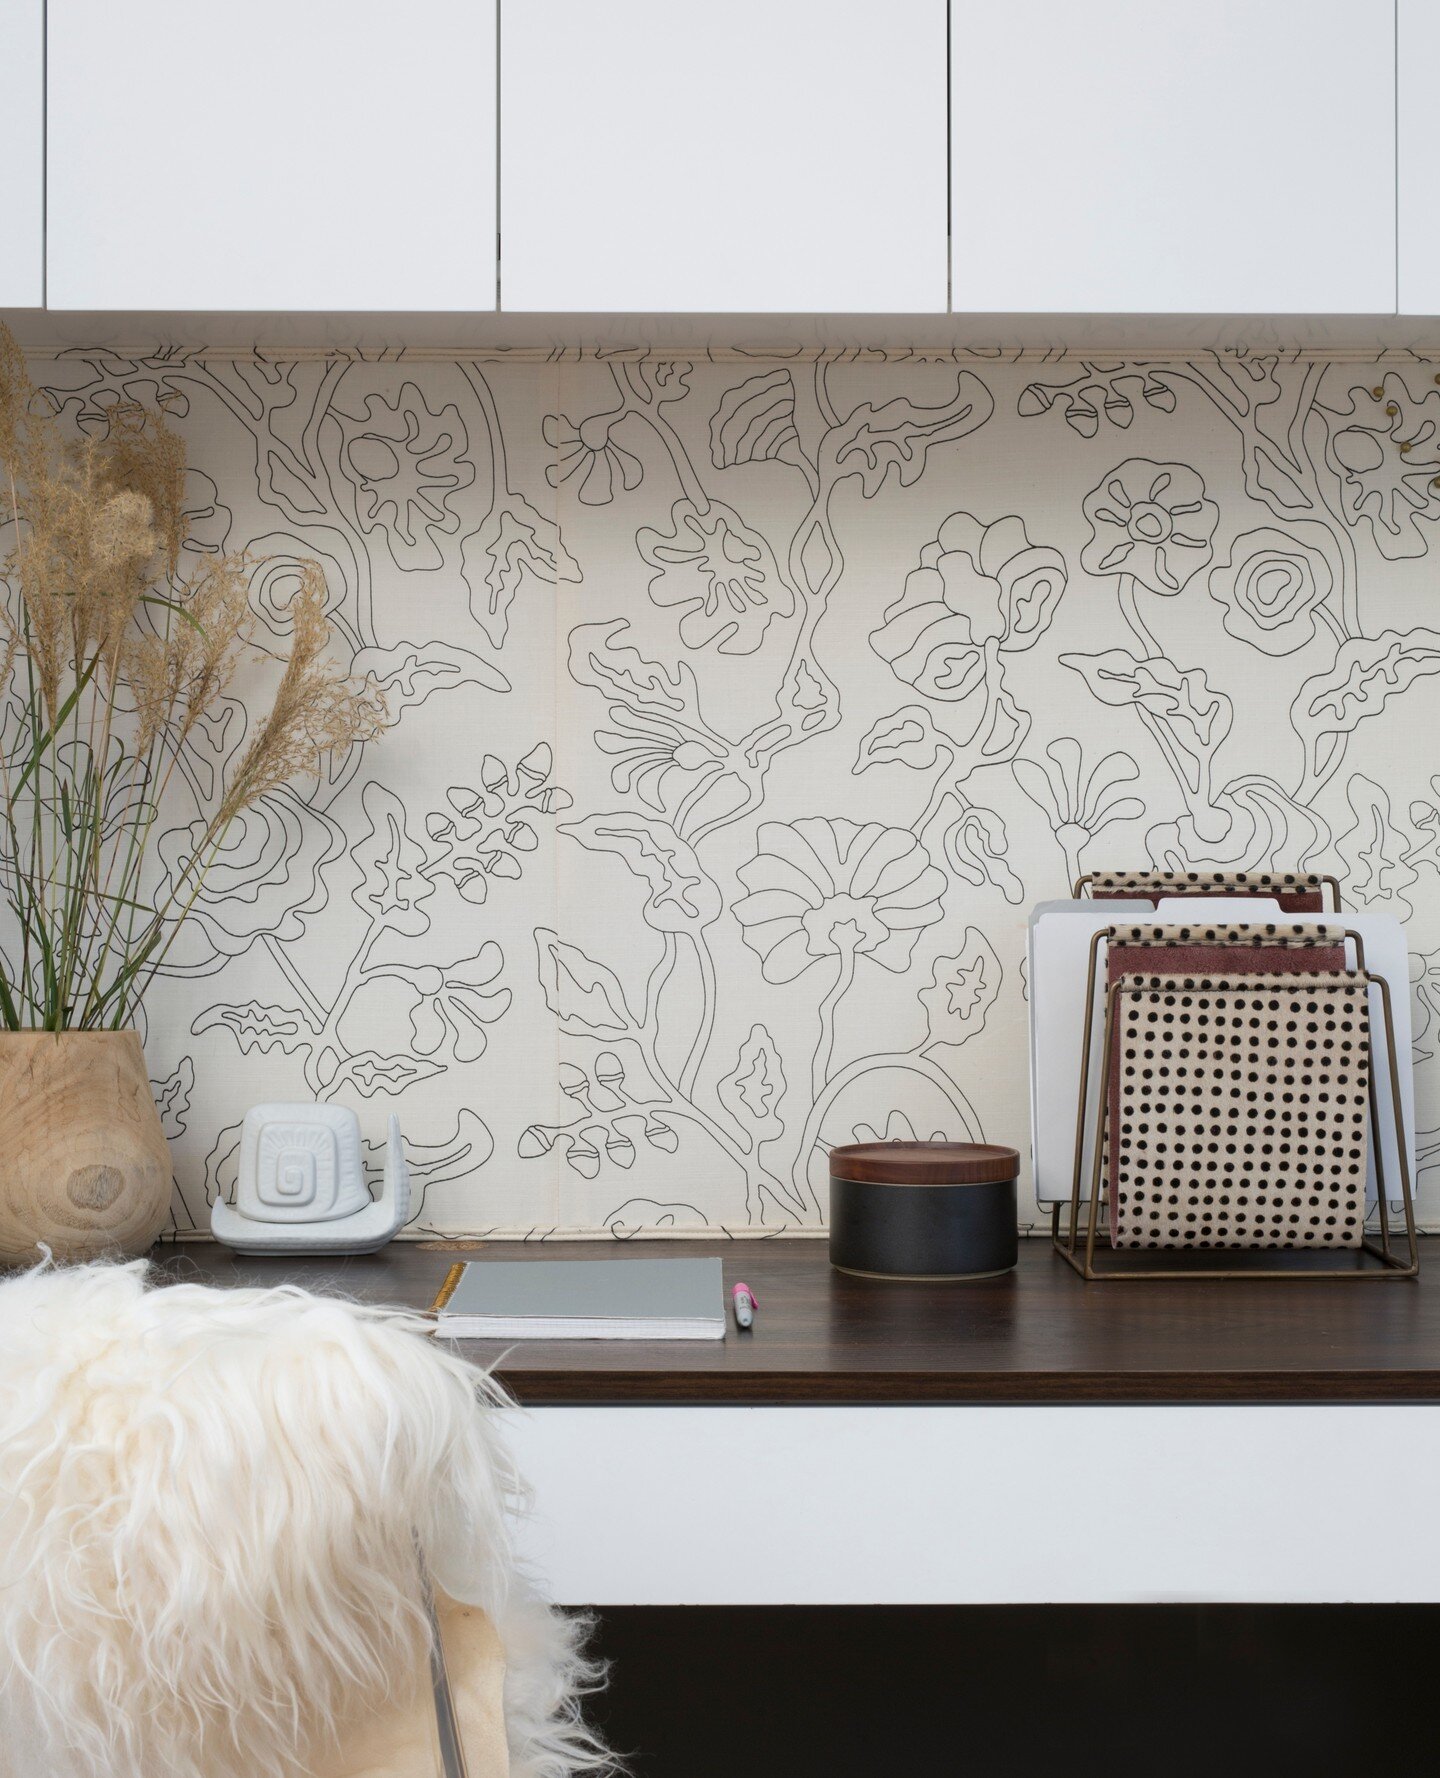 One of my favorite things to do with fabric is use it to upholster walls. Our client wanted to create a functional home office with a tackable wall inside a little niche in her kitchen. Nobody wanted to see a cork board in the middle of the all white